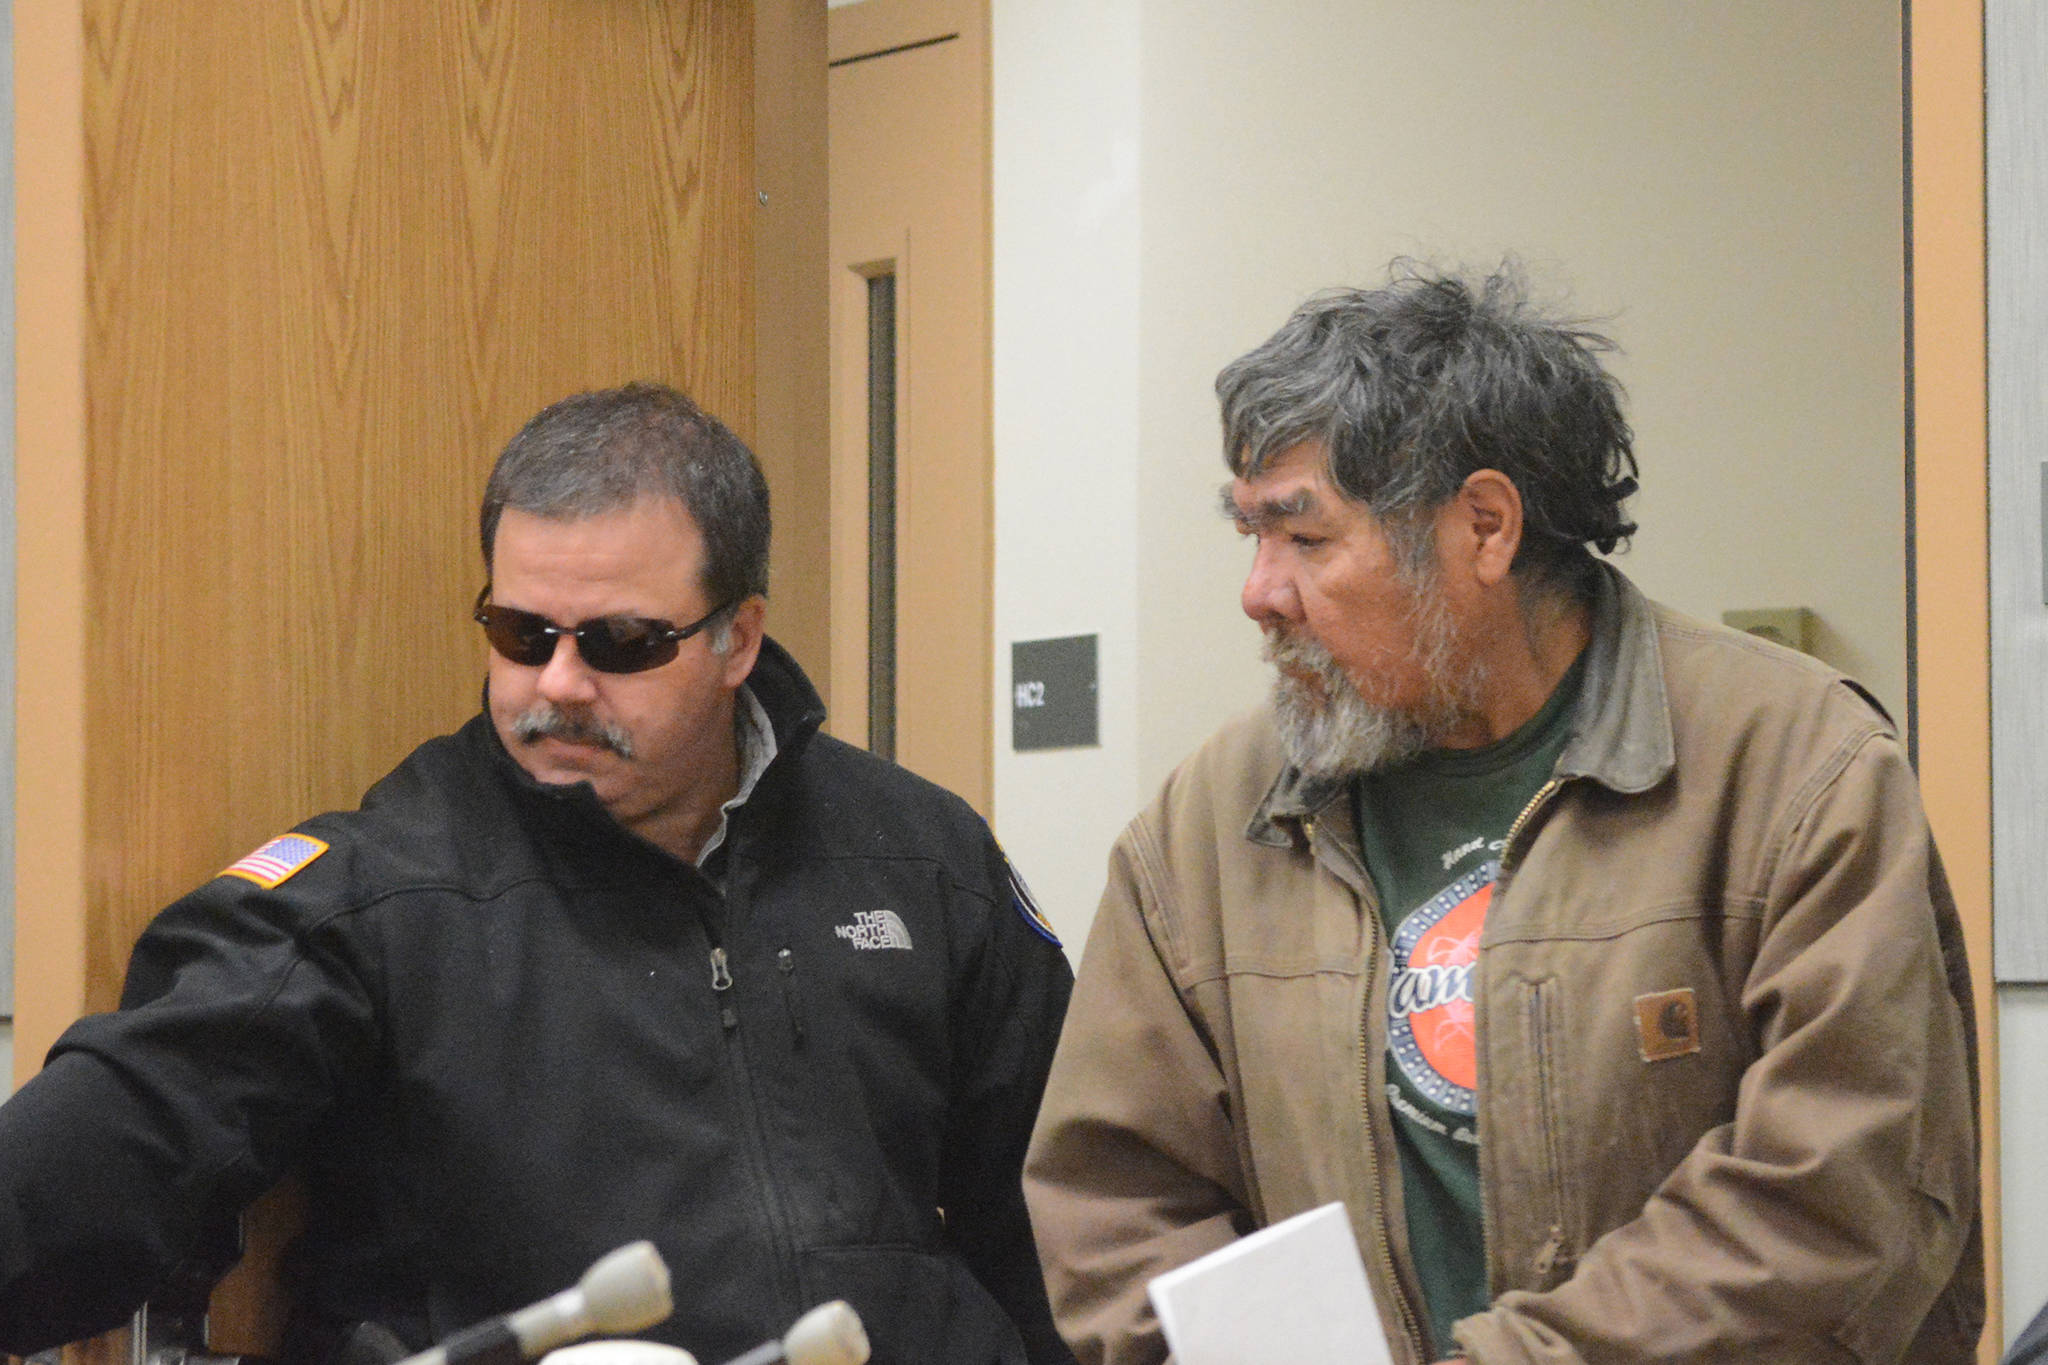 Homer Police Community Jail Officer Rick Pitta brings Lee John Henry into the Homer Courtroom for his arraignment on Monday, Oct. 17, 2016, in Homer, Alaska. Henry was charged with first-degree murder in the July 2013 death of Mark Matthew in Homer. (Photo by Michael Armstrong/Homer News)